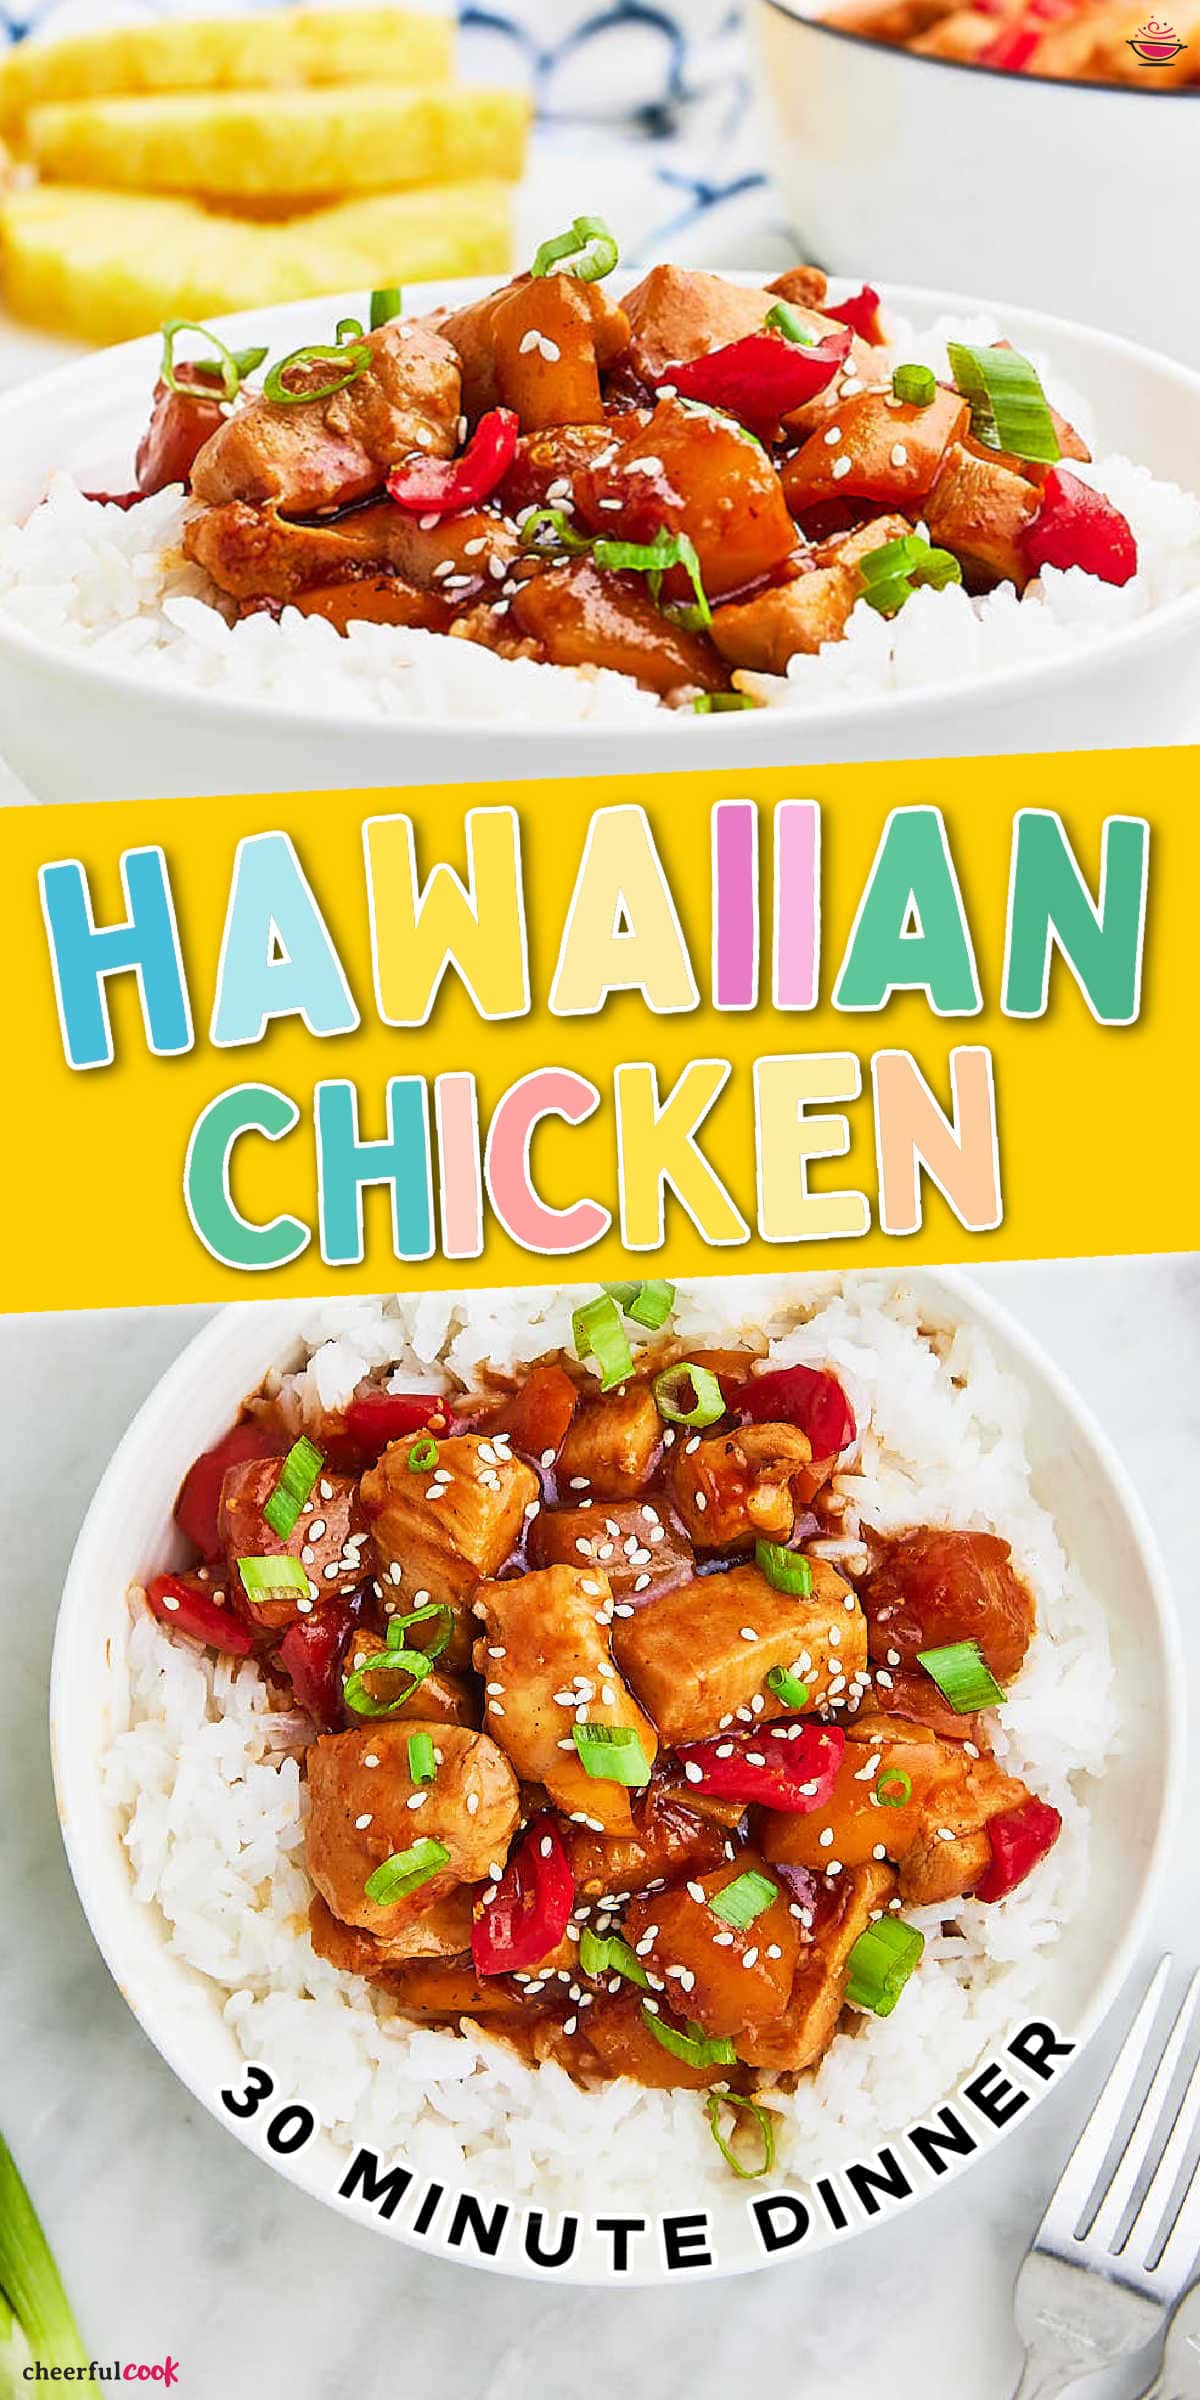 Dinner gets a tropical twist with this Hawaiian Chicken recipe. Juicy chicken, sweet pineapple, and a zingy sauce come together for a delightful meal that's easy to whip up in your own kitchen. #cheerfulcook #Hawaiianchicken #chickendinner #weeknightdinner #easydinner #chickenrecipes via @cheerfulcook